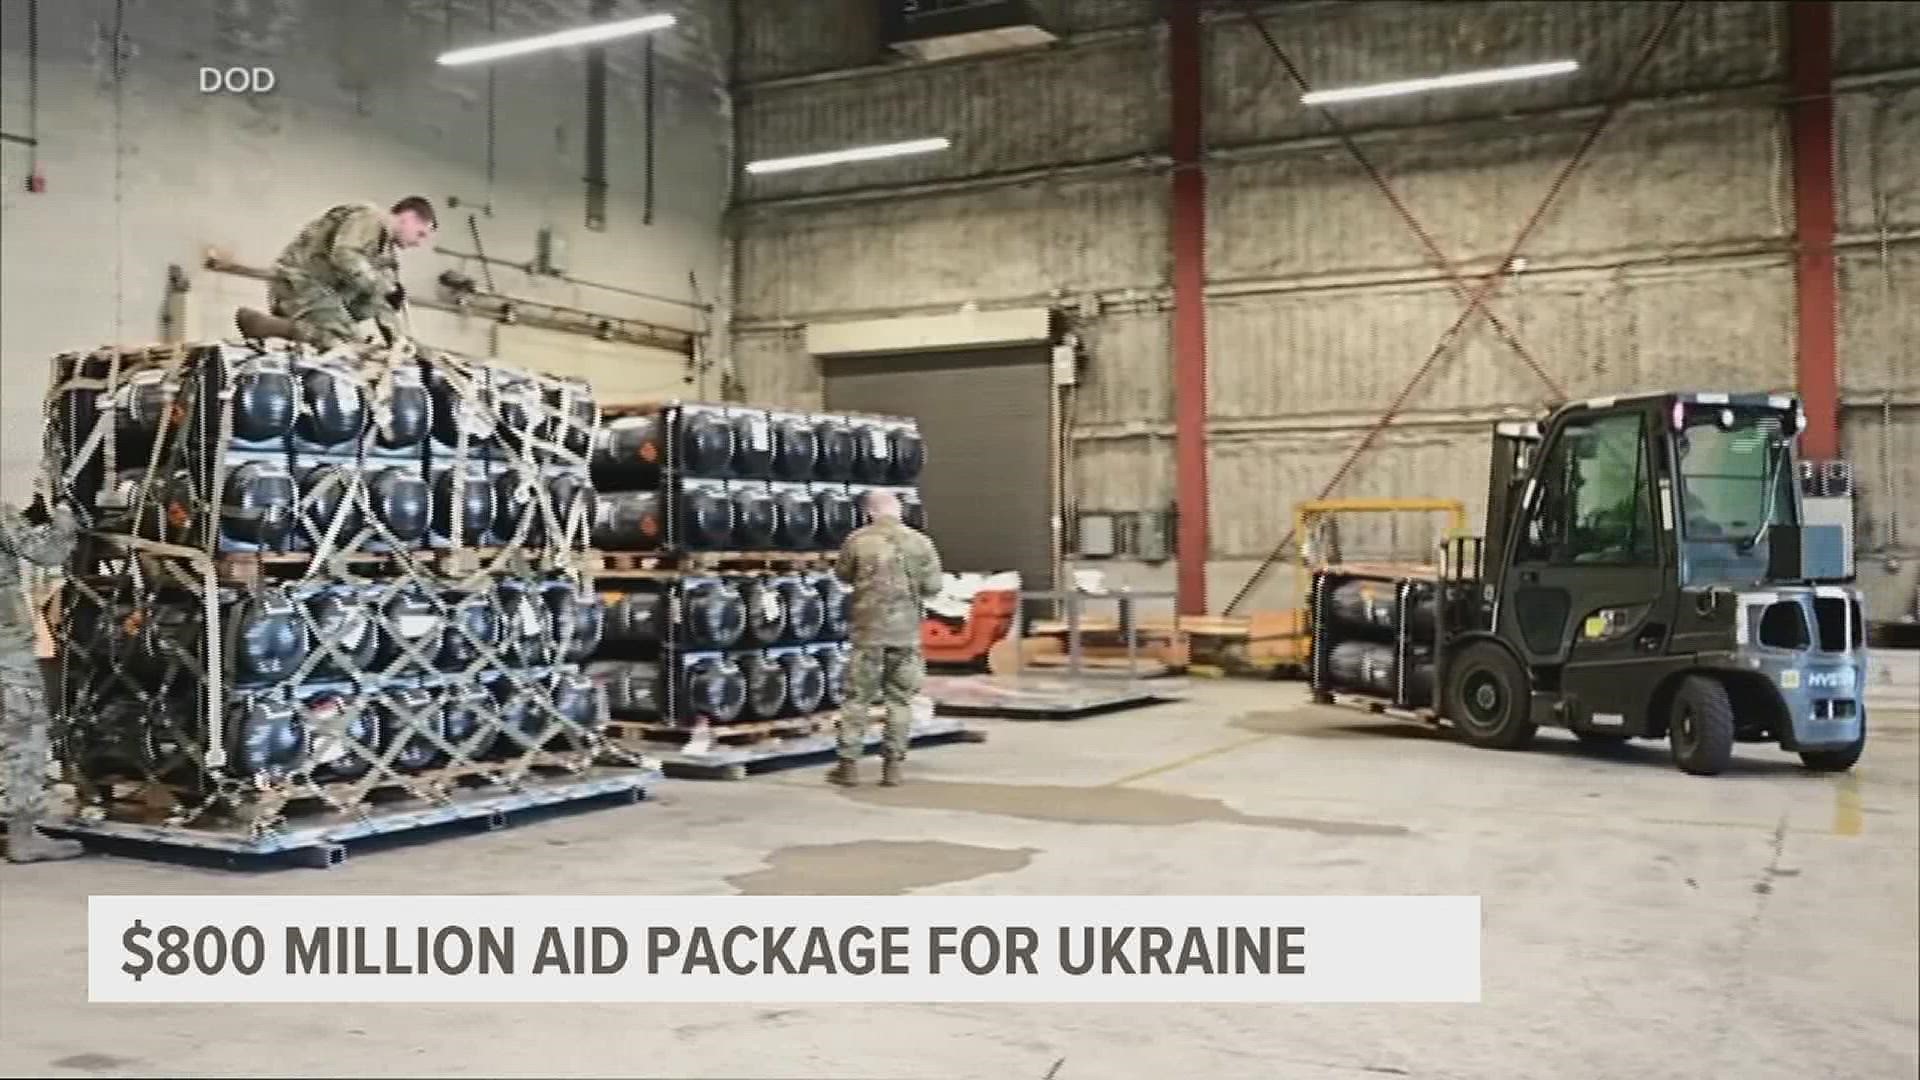 The package includes 144,000 rounds of ammunition and drones for Ukrainian forces in the escalating battle for the Donbas region of eastern Ukraine.